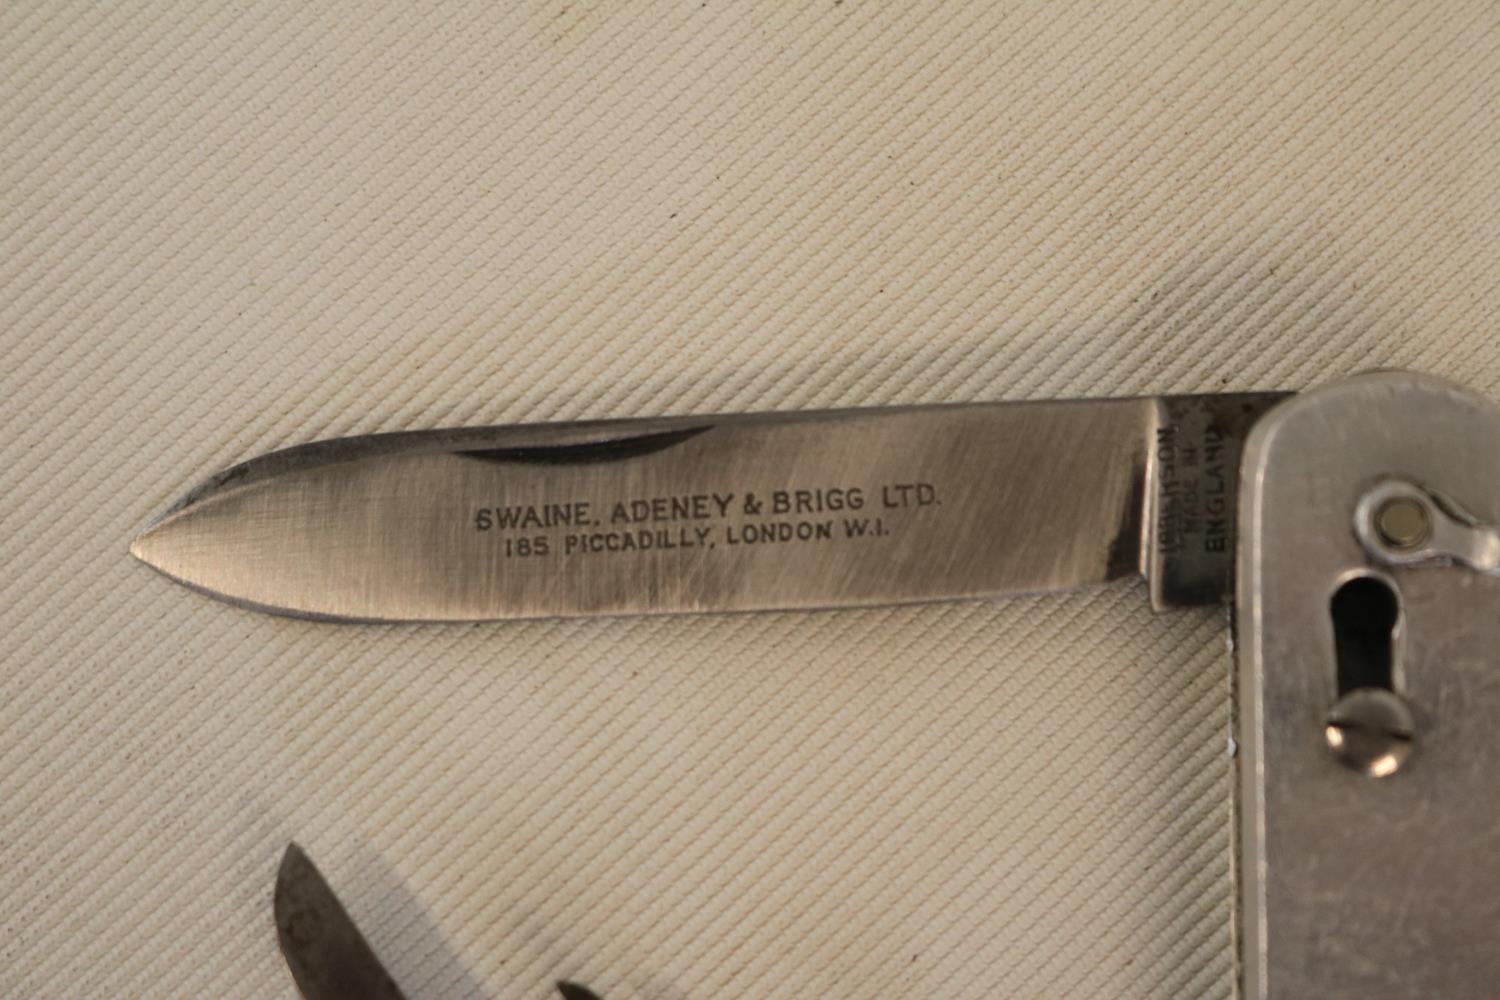 Swaine Adeney & Brigg Ltd Hunting Dog Nail clipper and Pocket knife with Ibberson Blade 11cm in - Image 3 of 4